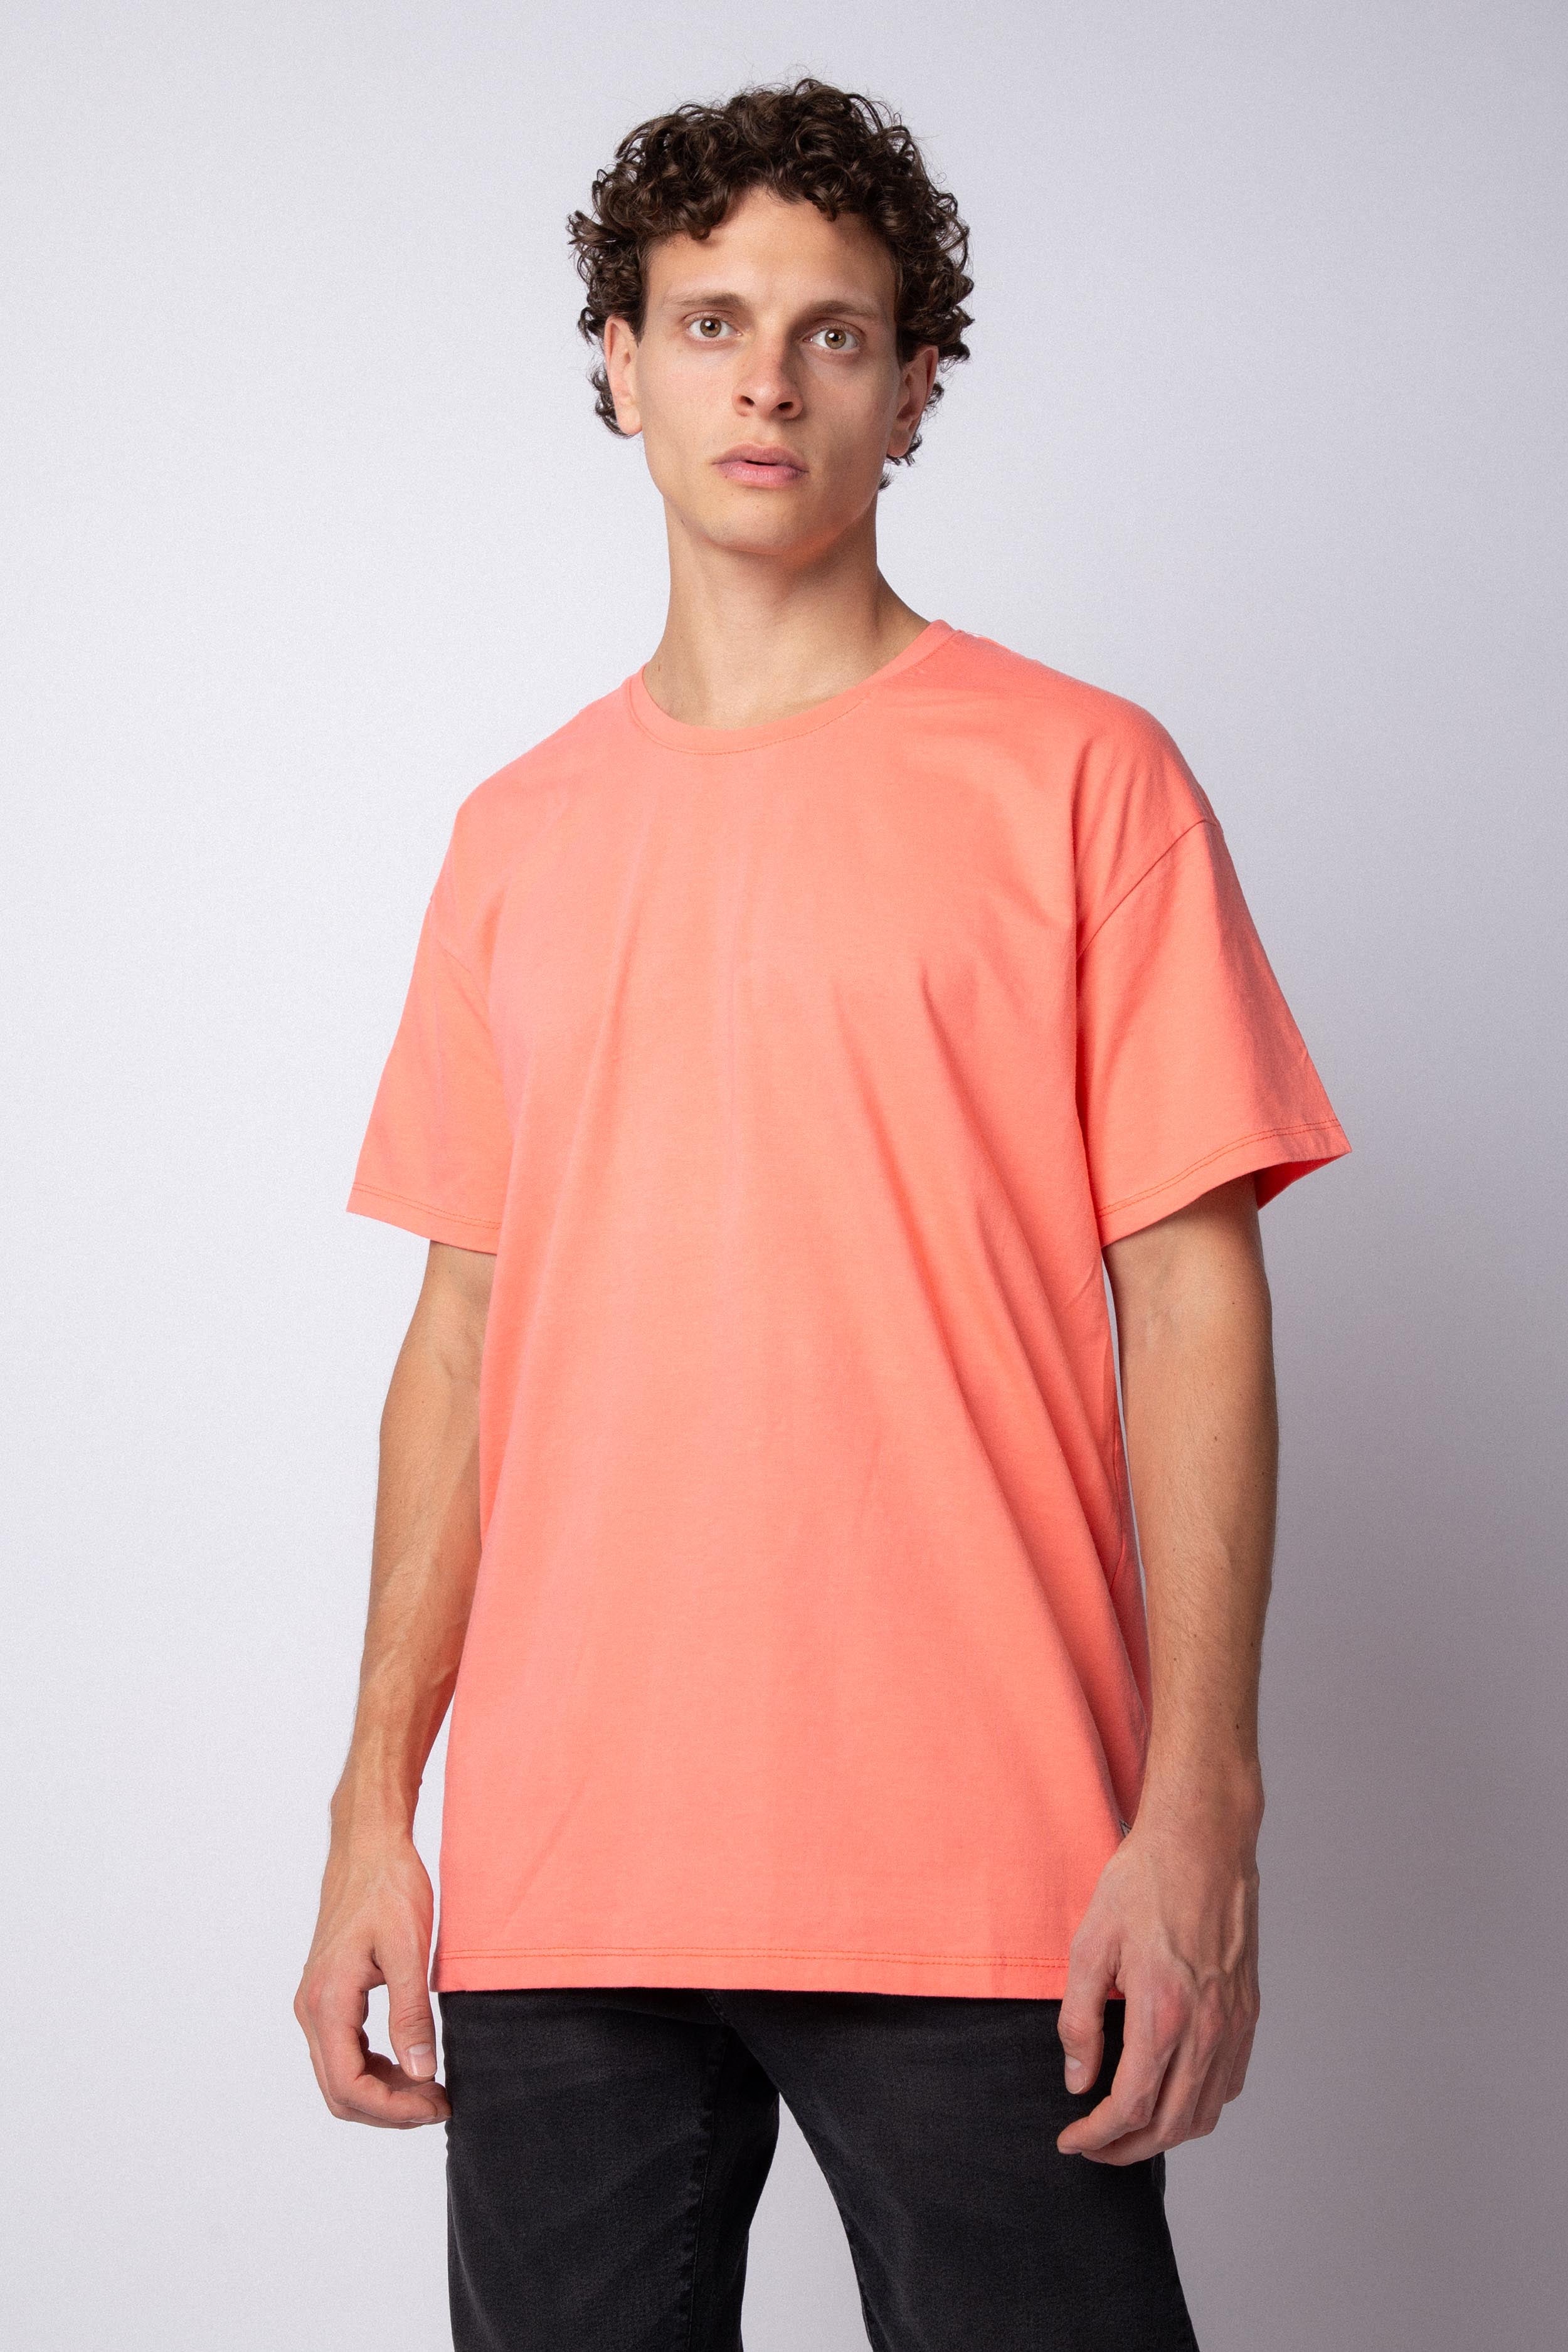 Remera Over-Size Kut Coral